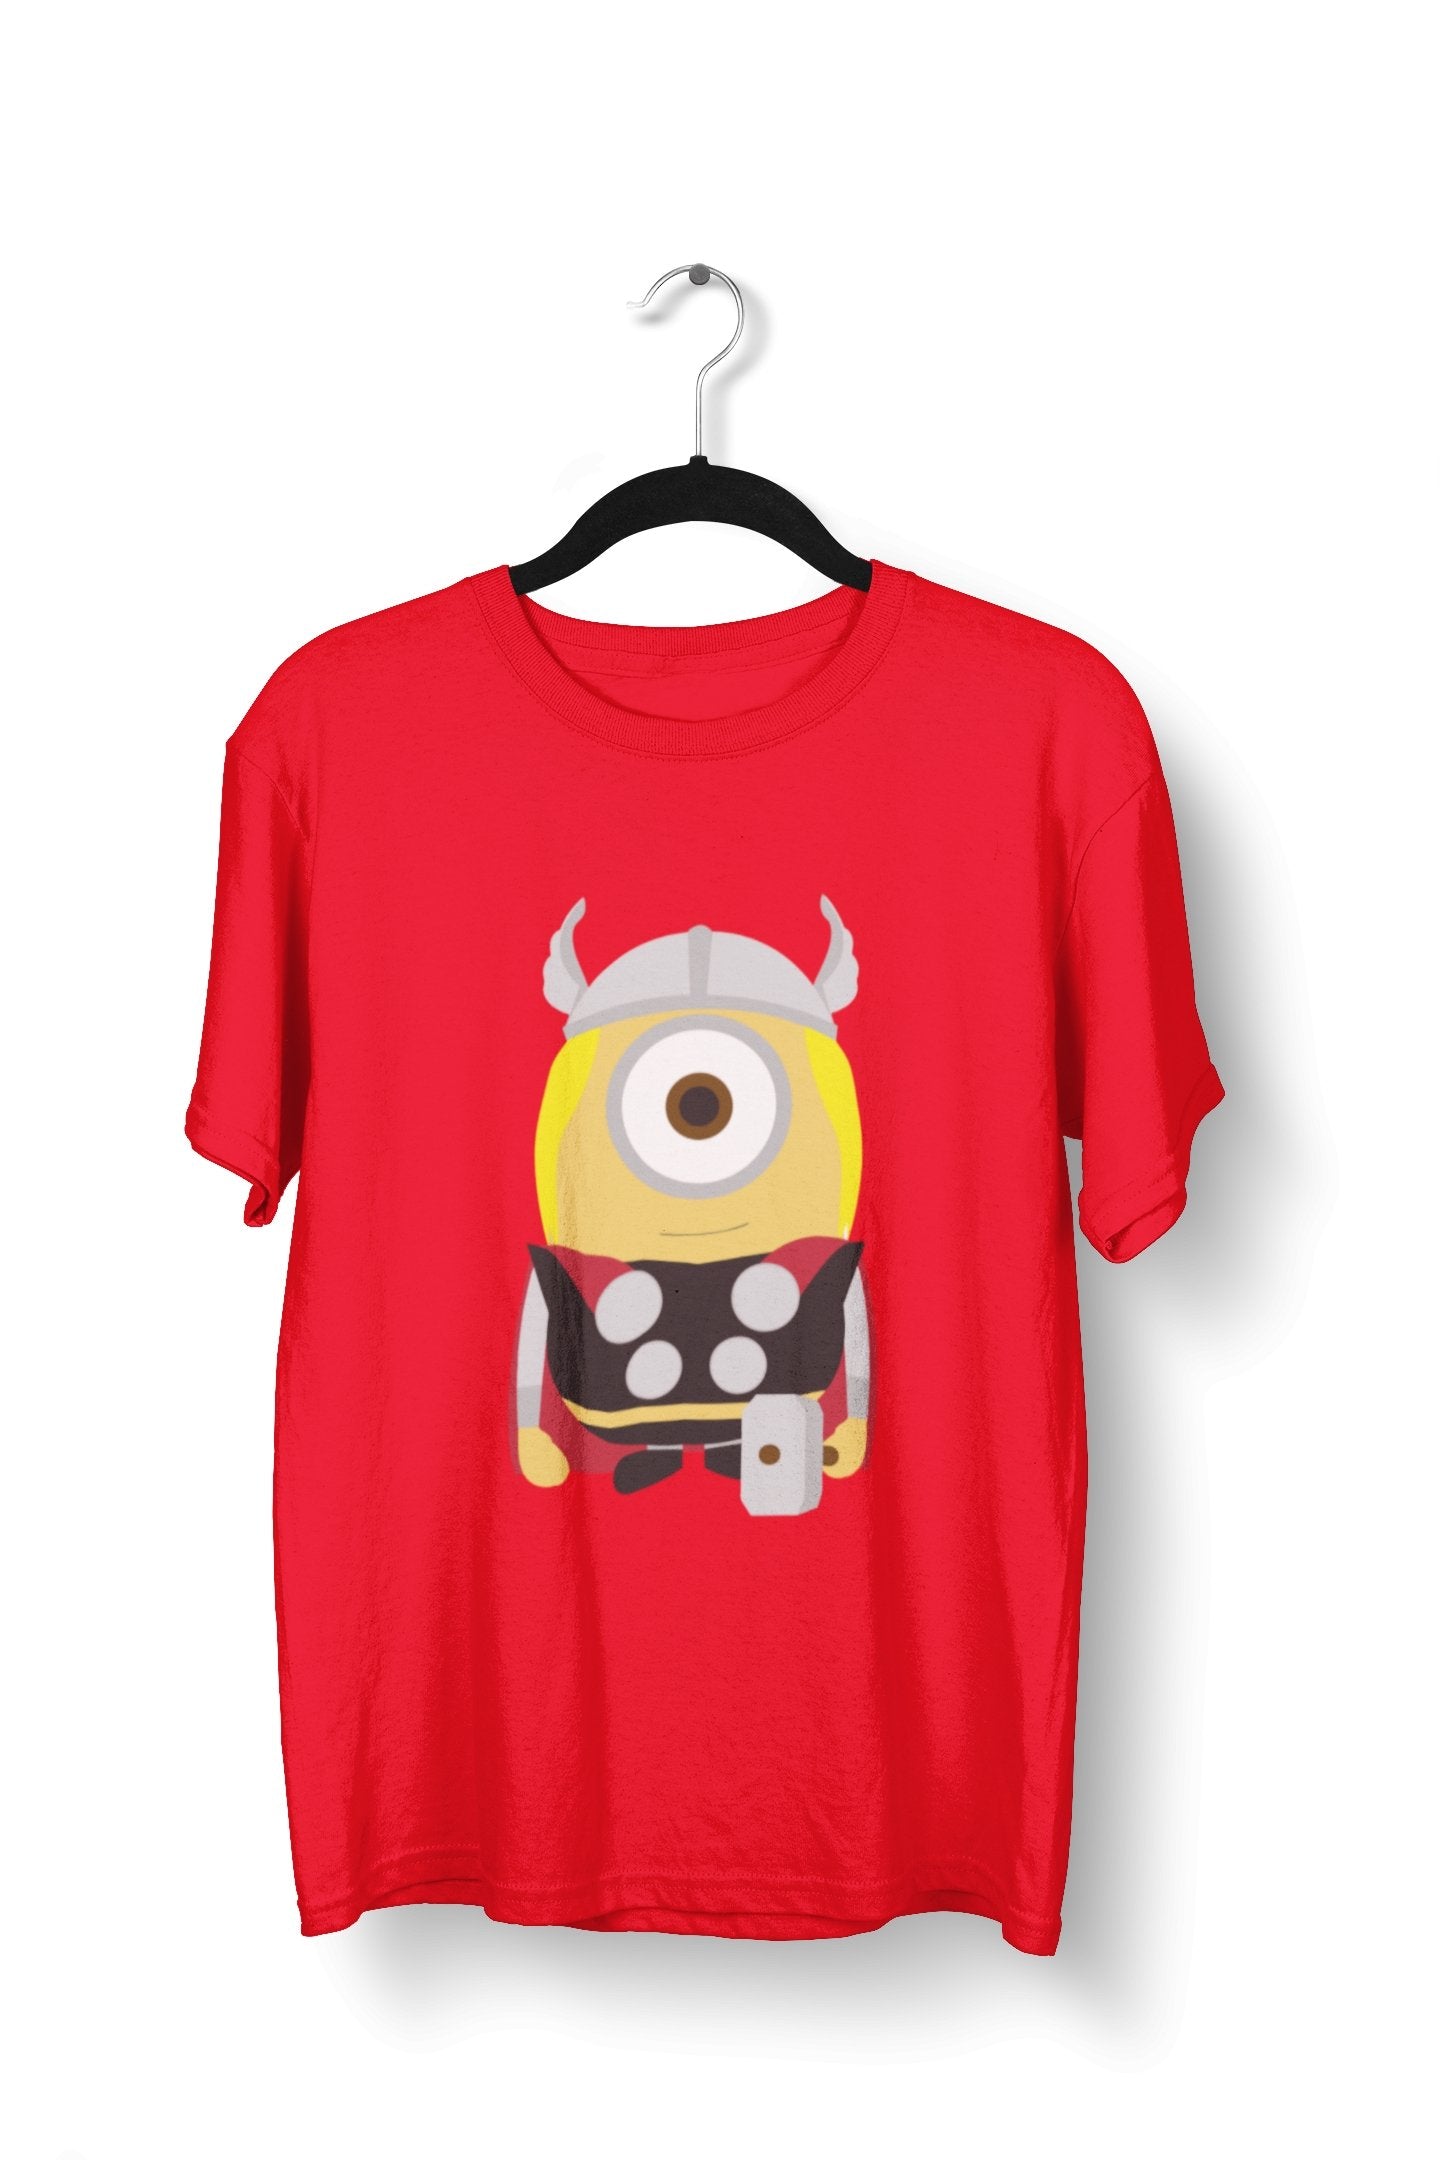 thelegalgang,Thor Minion Graphic T-Shirt for Men,.